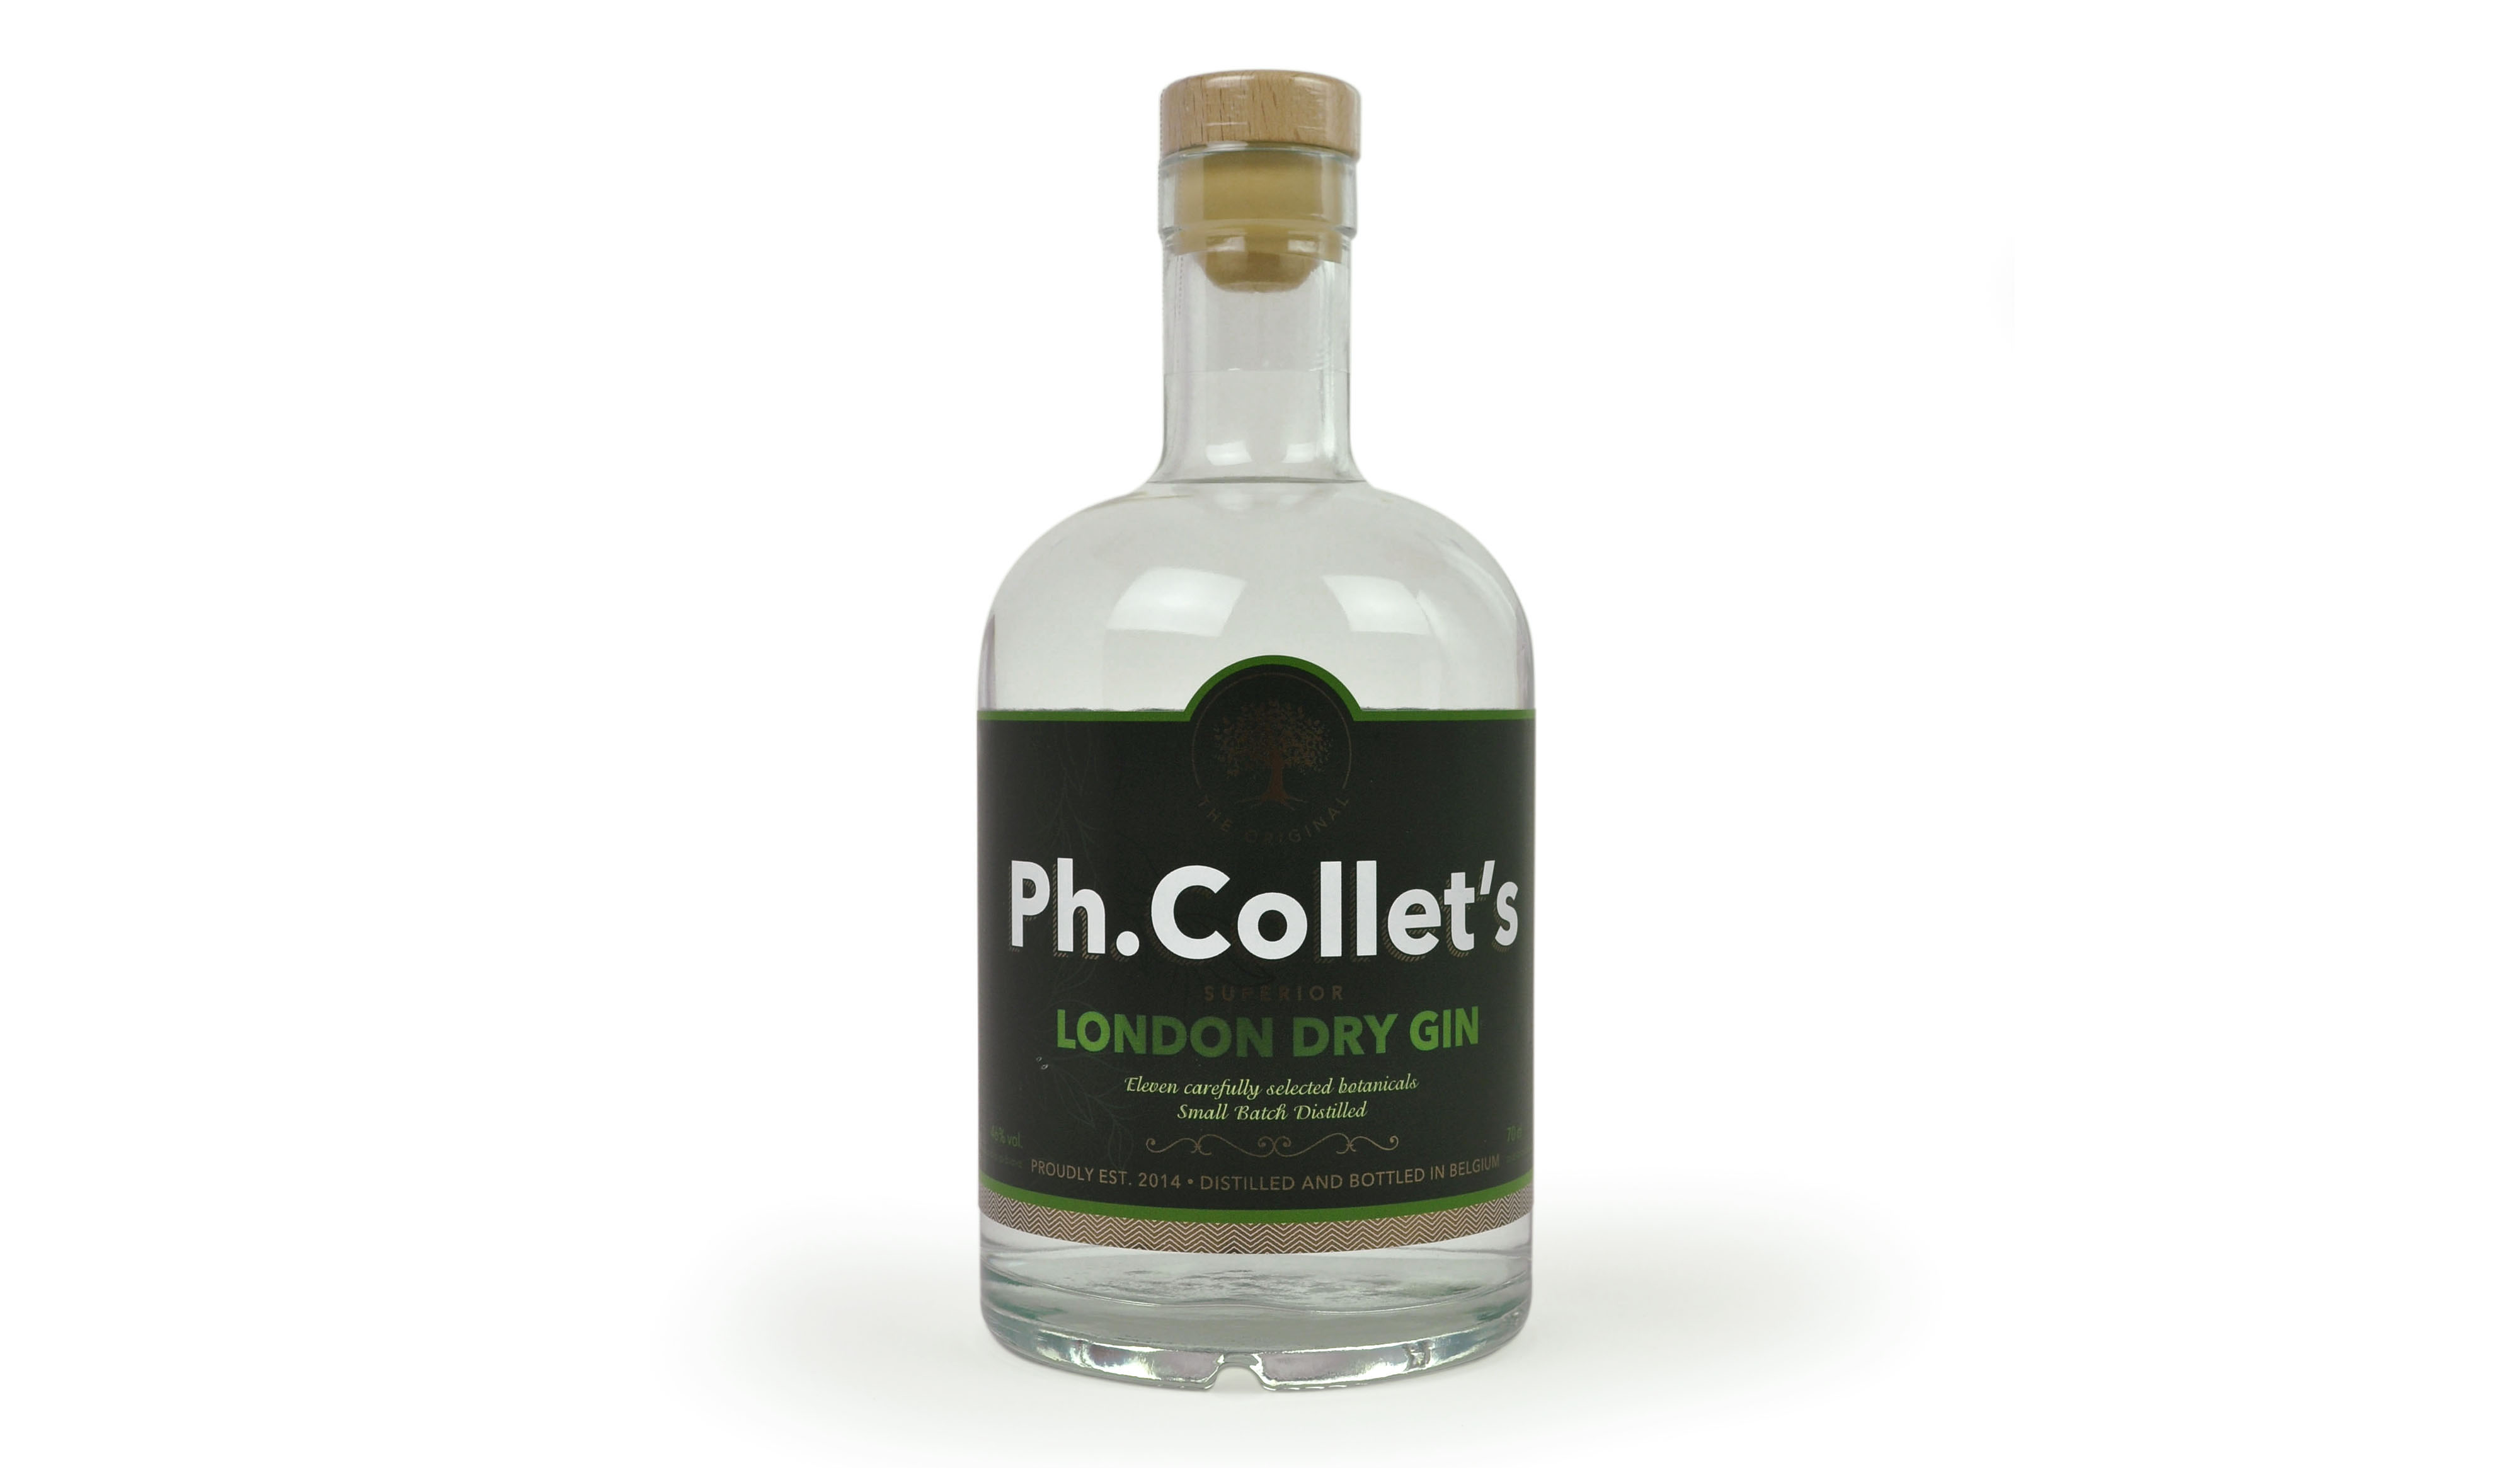 Ph.Collet's London Dry Gin